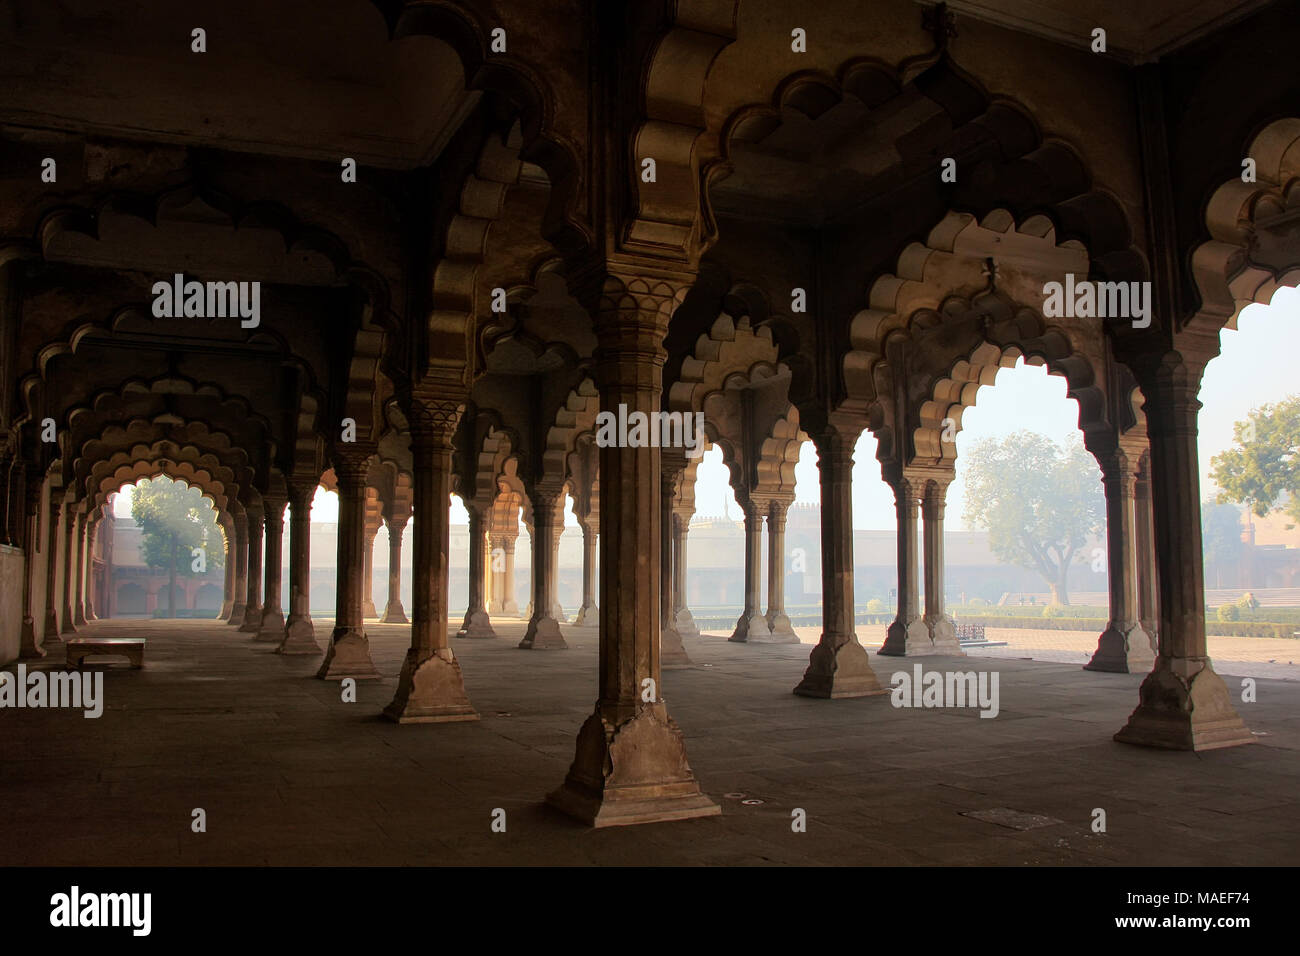 Diwan-i-Am - Hall of Public Audience in Agra Fort, Uttar Pradesh, India. The fort was built primarily as a military structure, but was later upgraded  Stock Photo